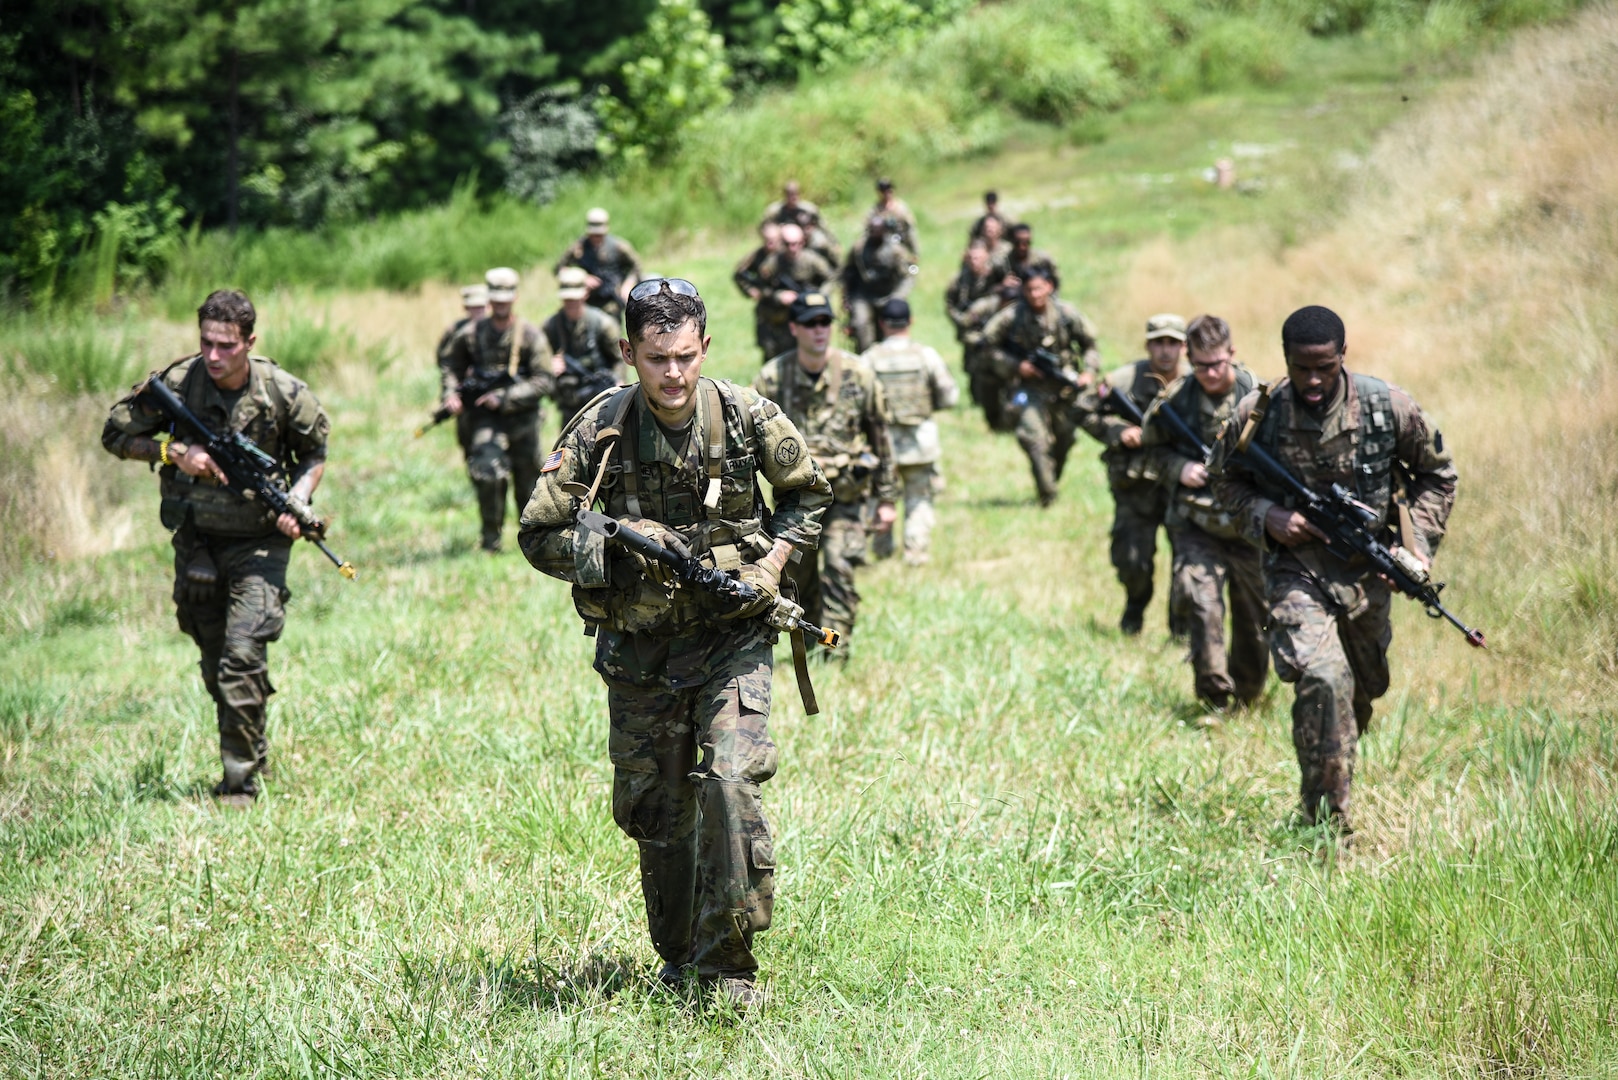 Jungle Operations Training Course challenges mental, physical